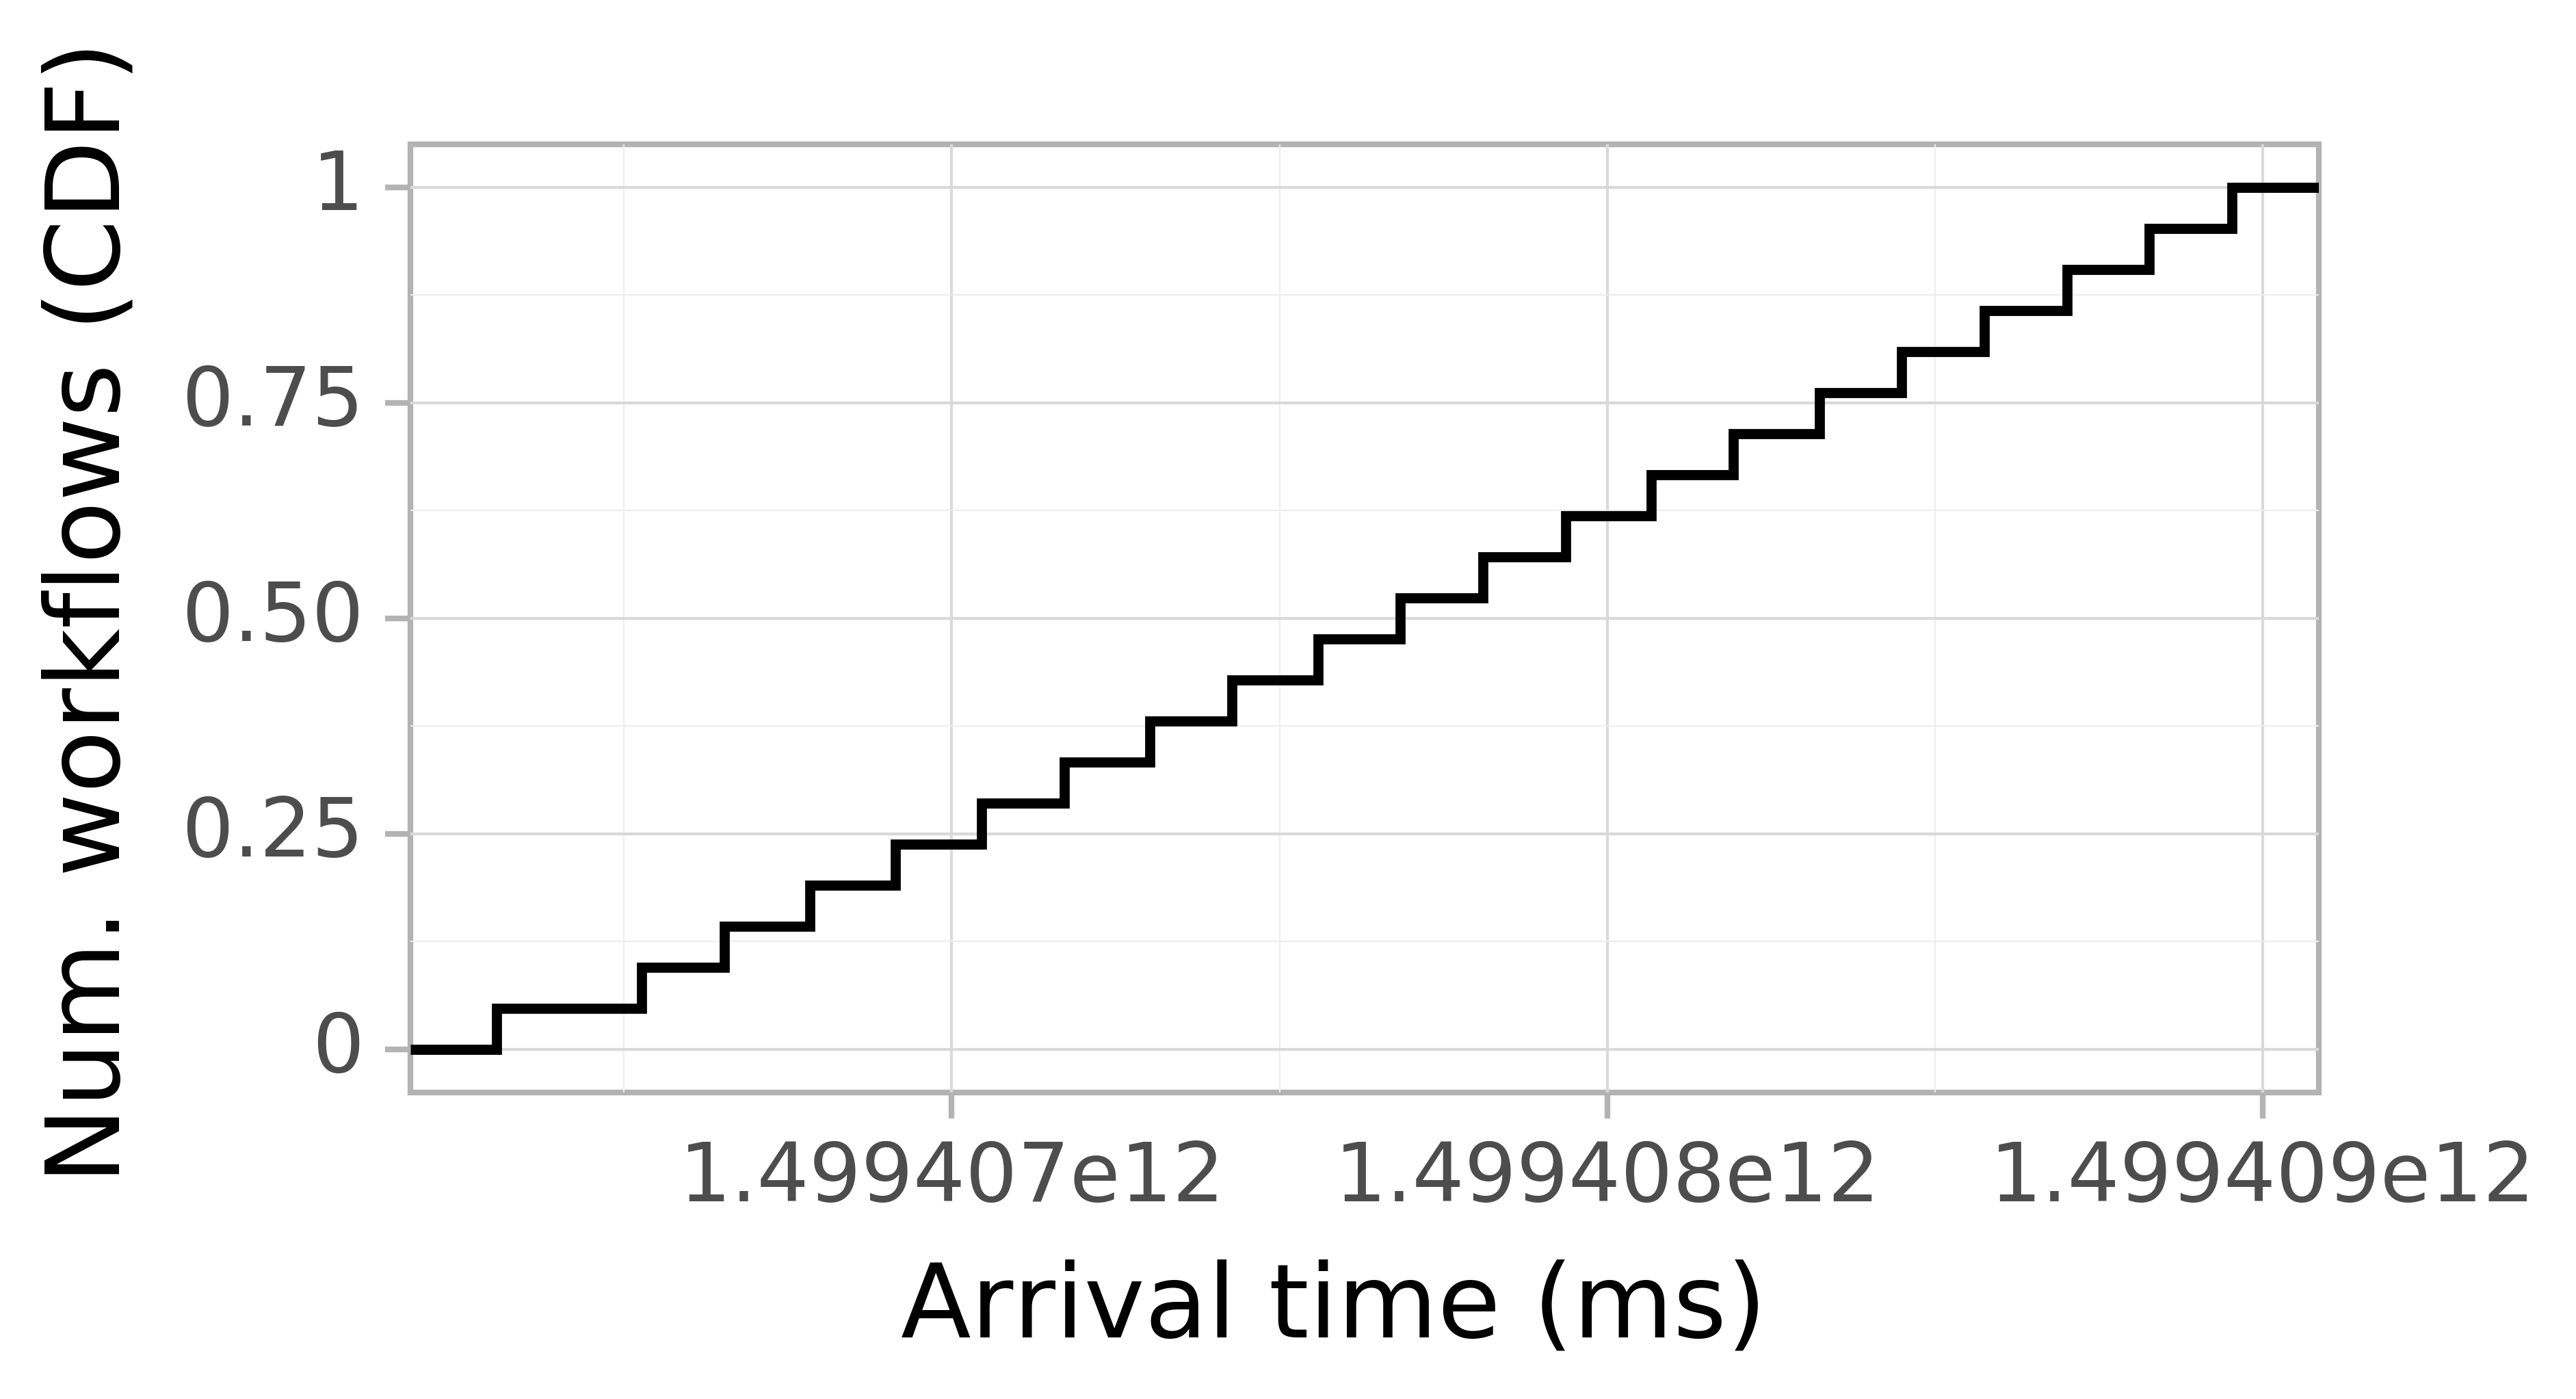 Job arrival CDF graph for the askalon-new_ee12 trace.